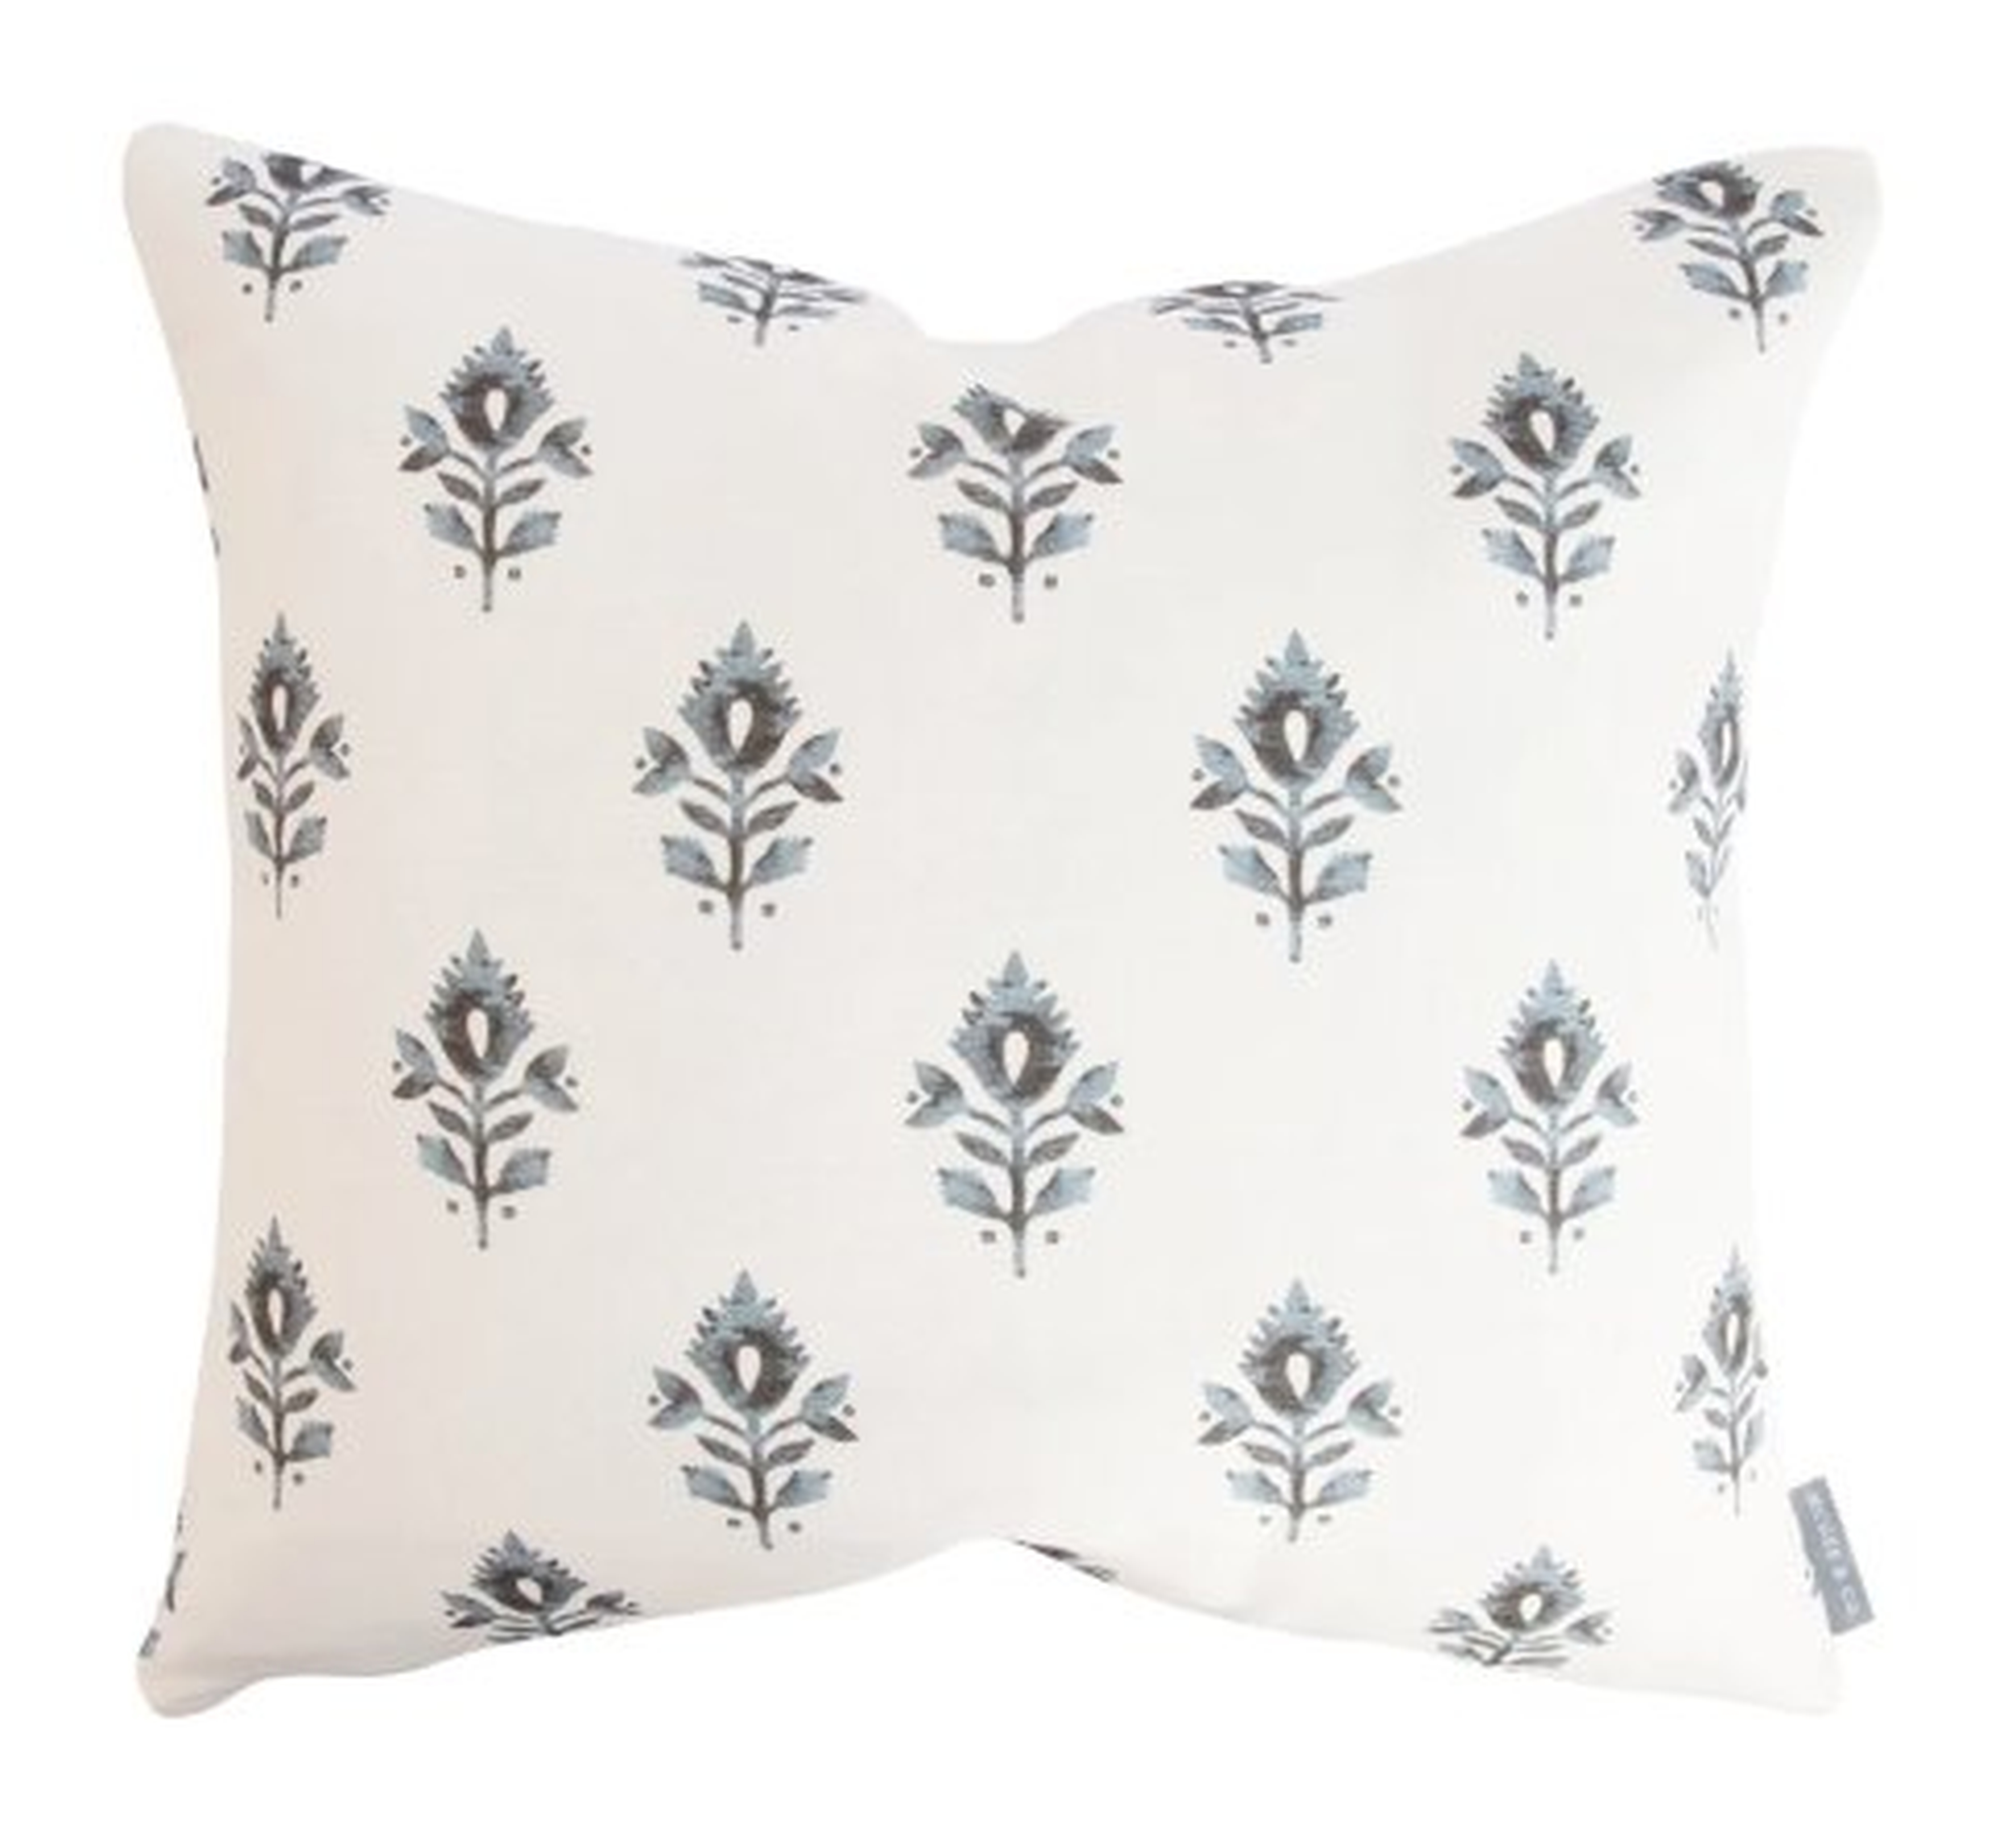 ADDISON BLOCK PRINT PILLOW COVER - McGee & Co.